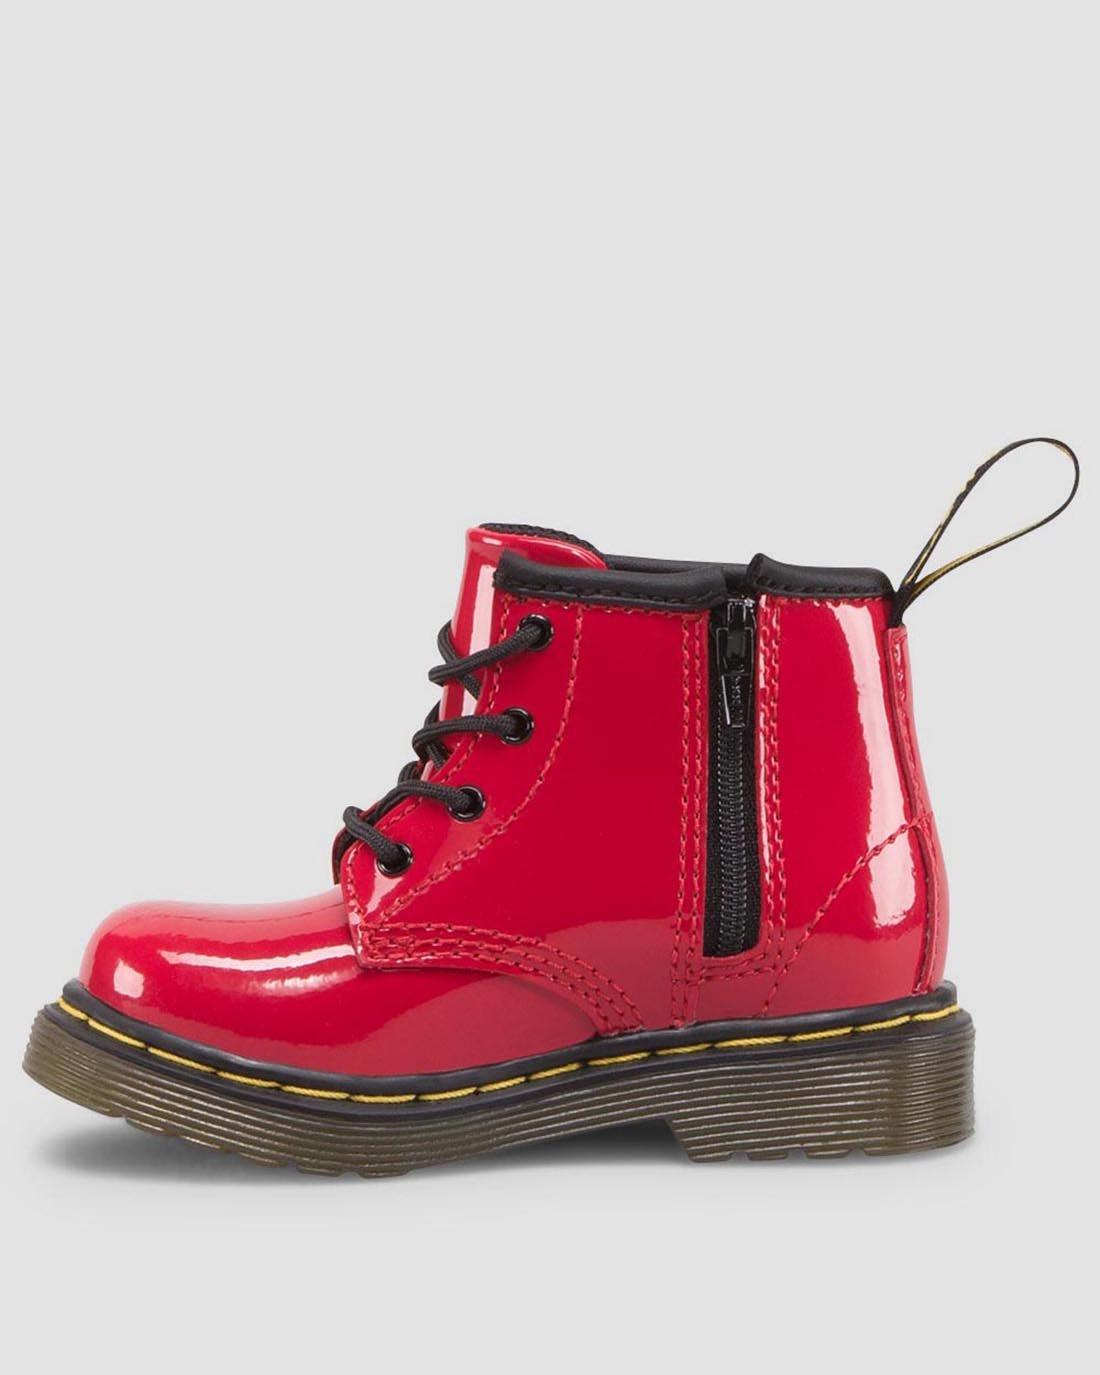 Infant 1460 Patent Leather Lace Up Boots in Red